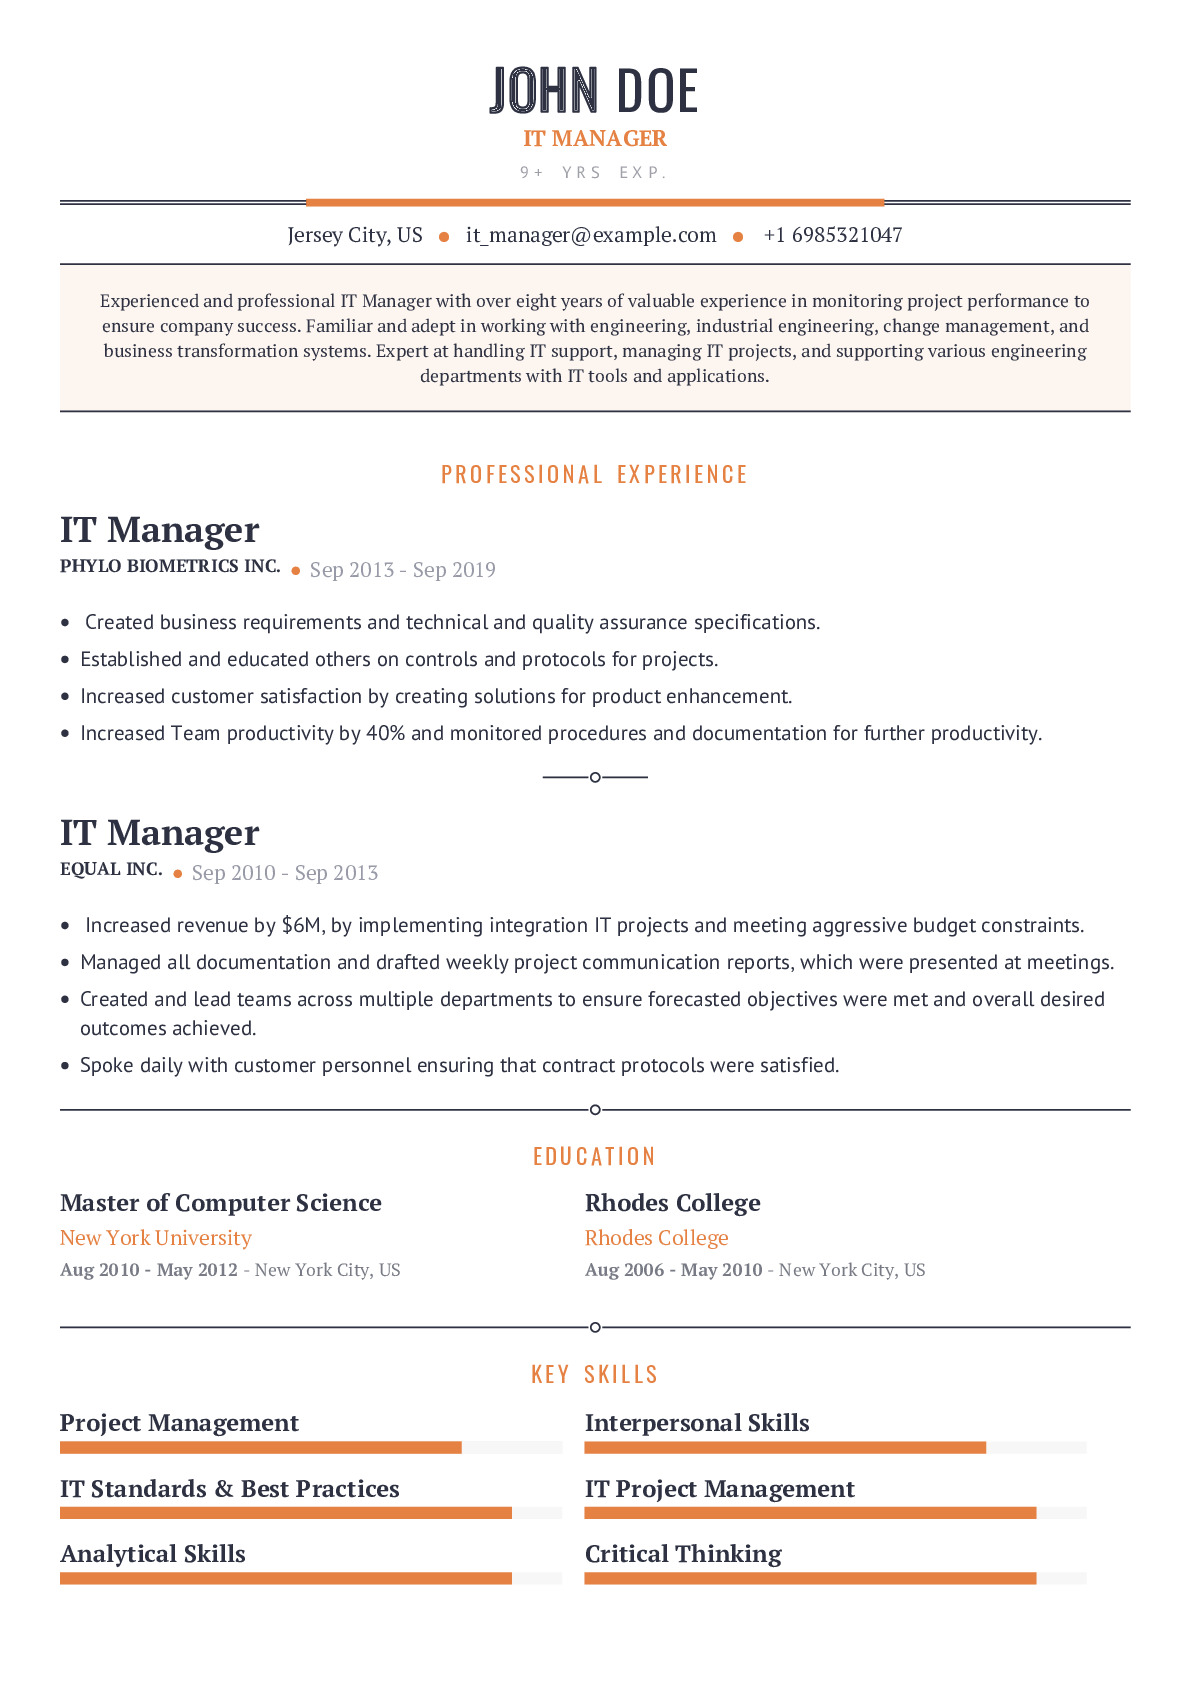 IT Manager Resume Example